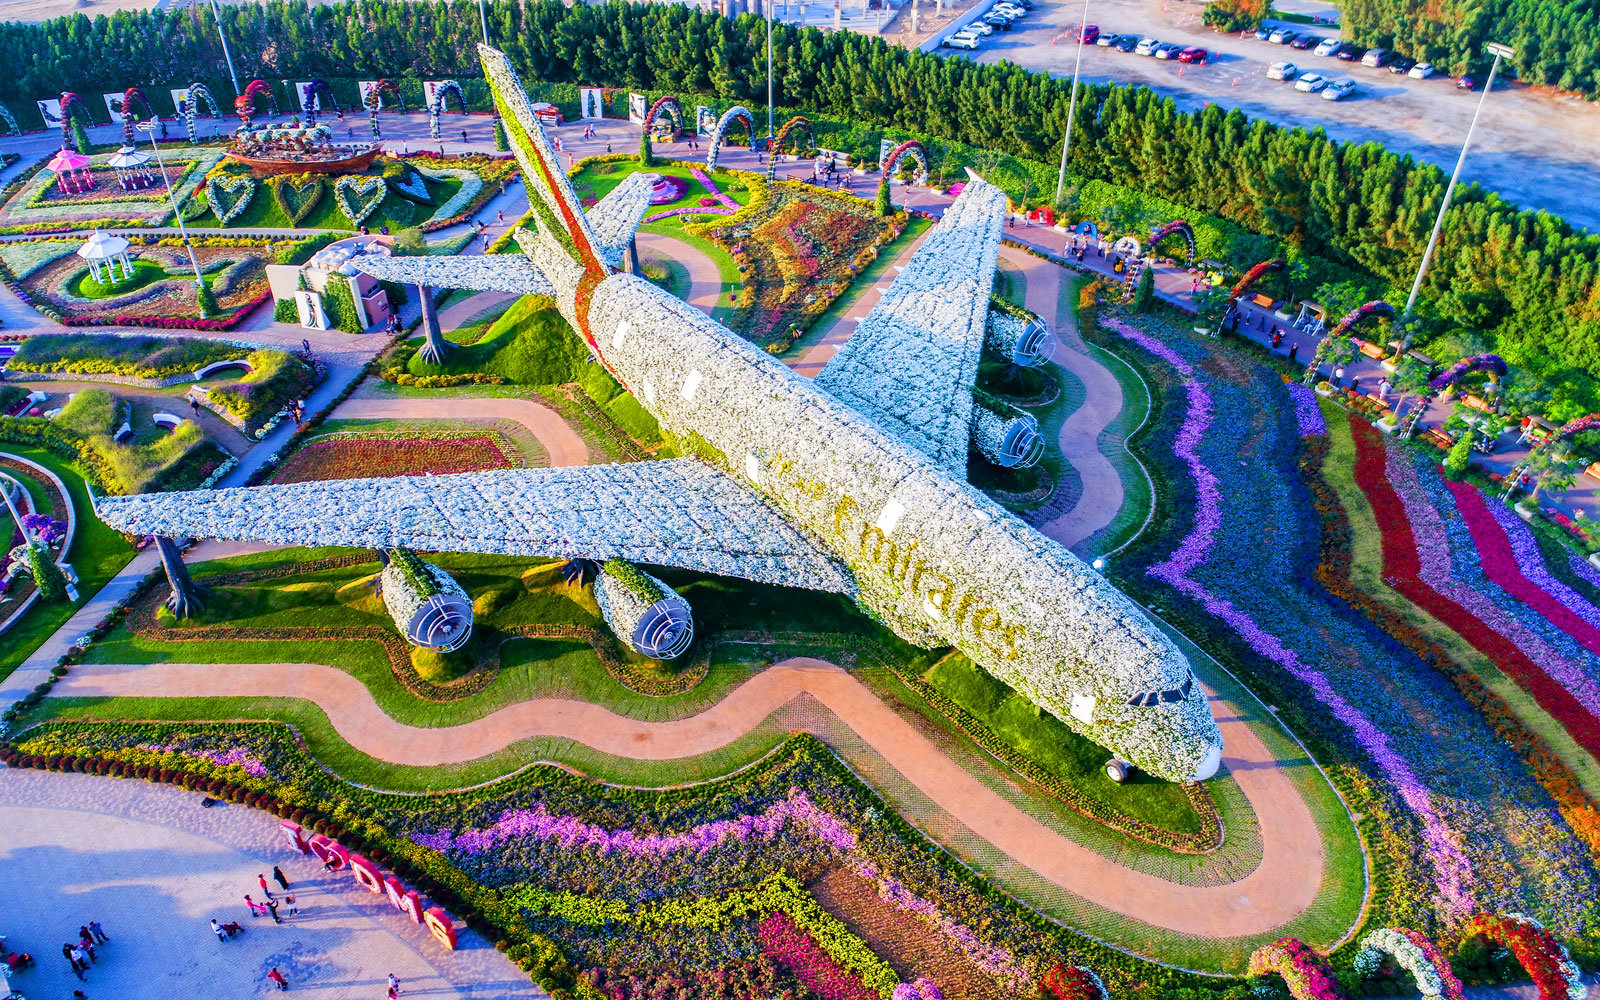 Dubai Miracle Garden Re Opens With 150 Million Flowers Esquire Middle East